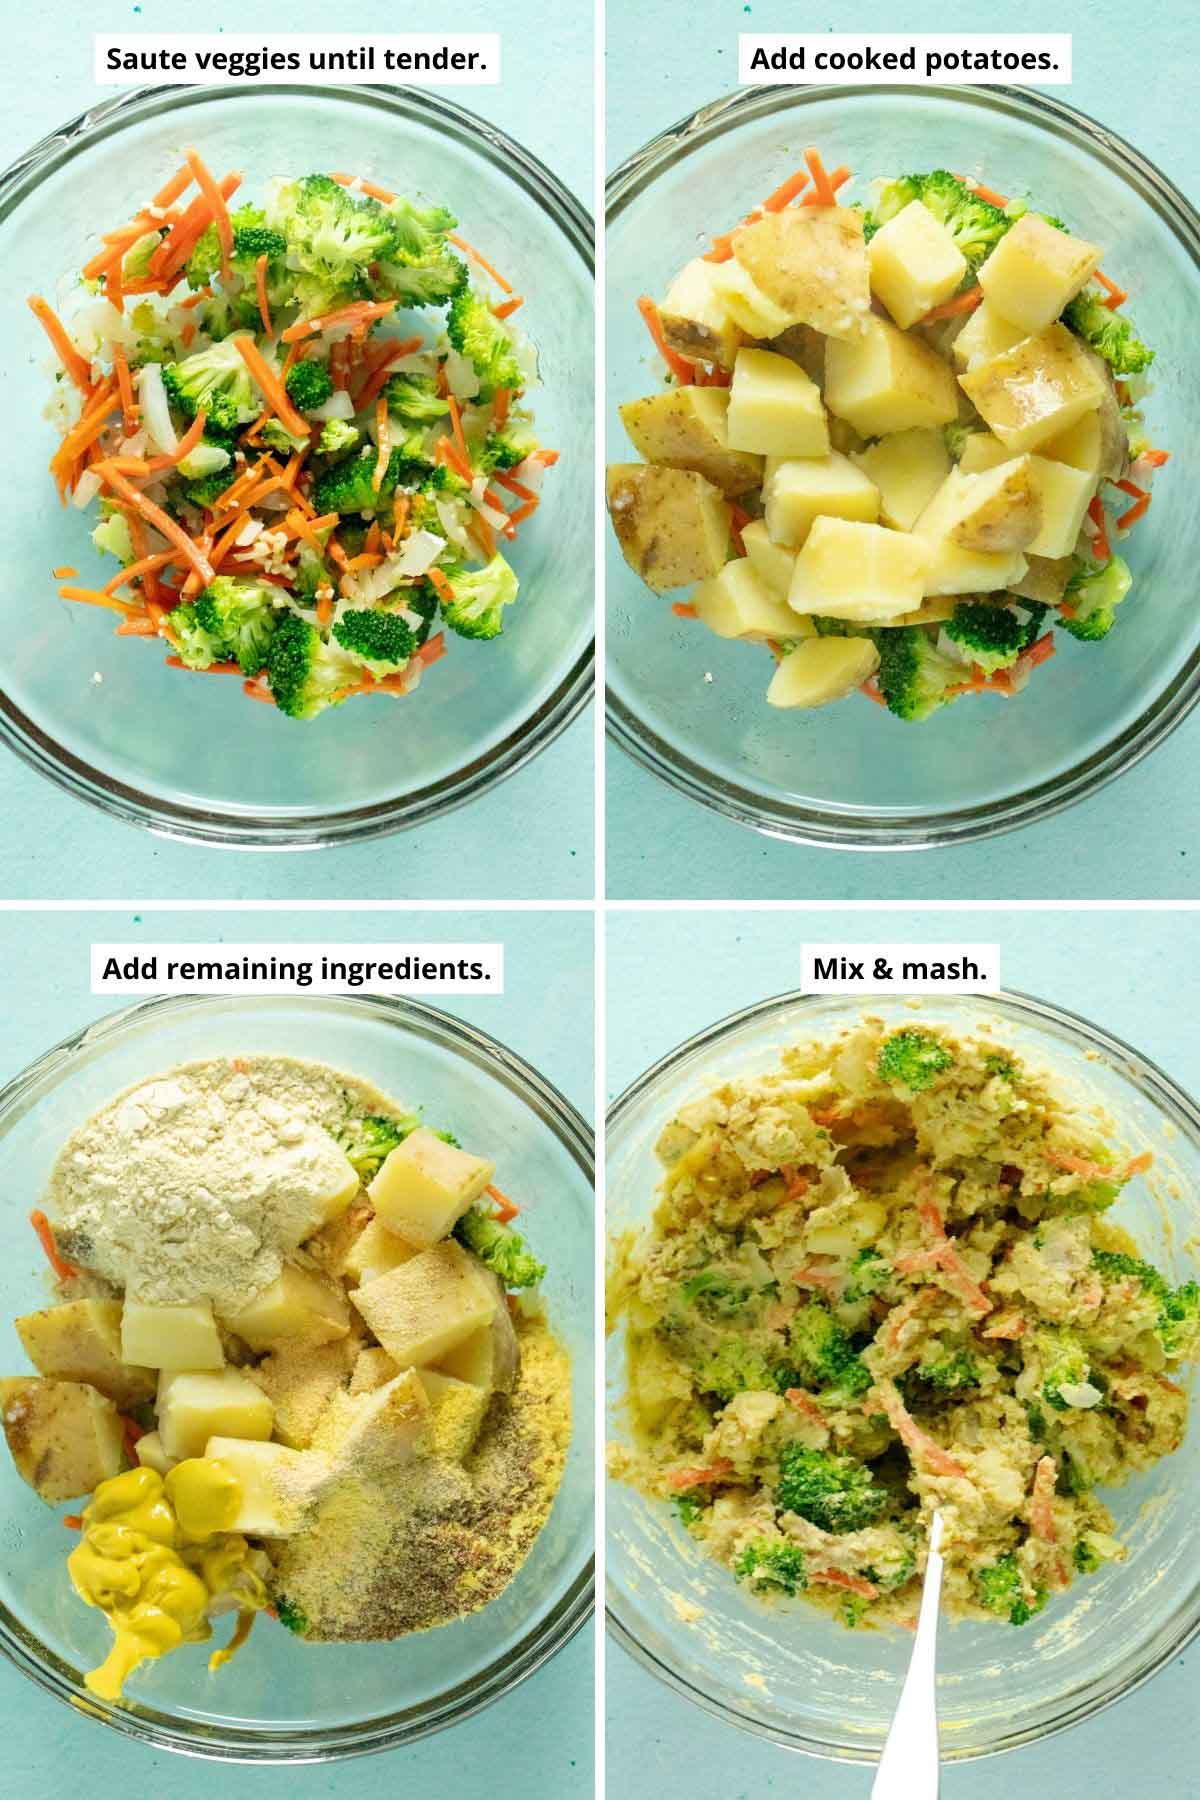 image collage showing the cooked veggies in a mixing bowl, then the cooked potatoes added, then the remaining ingredients before and after mashing into potato cake dough